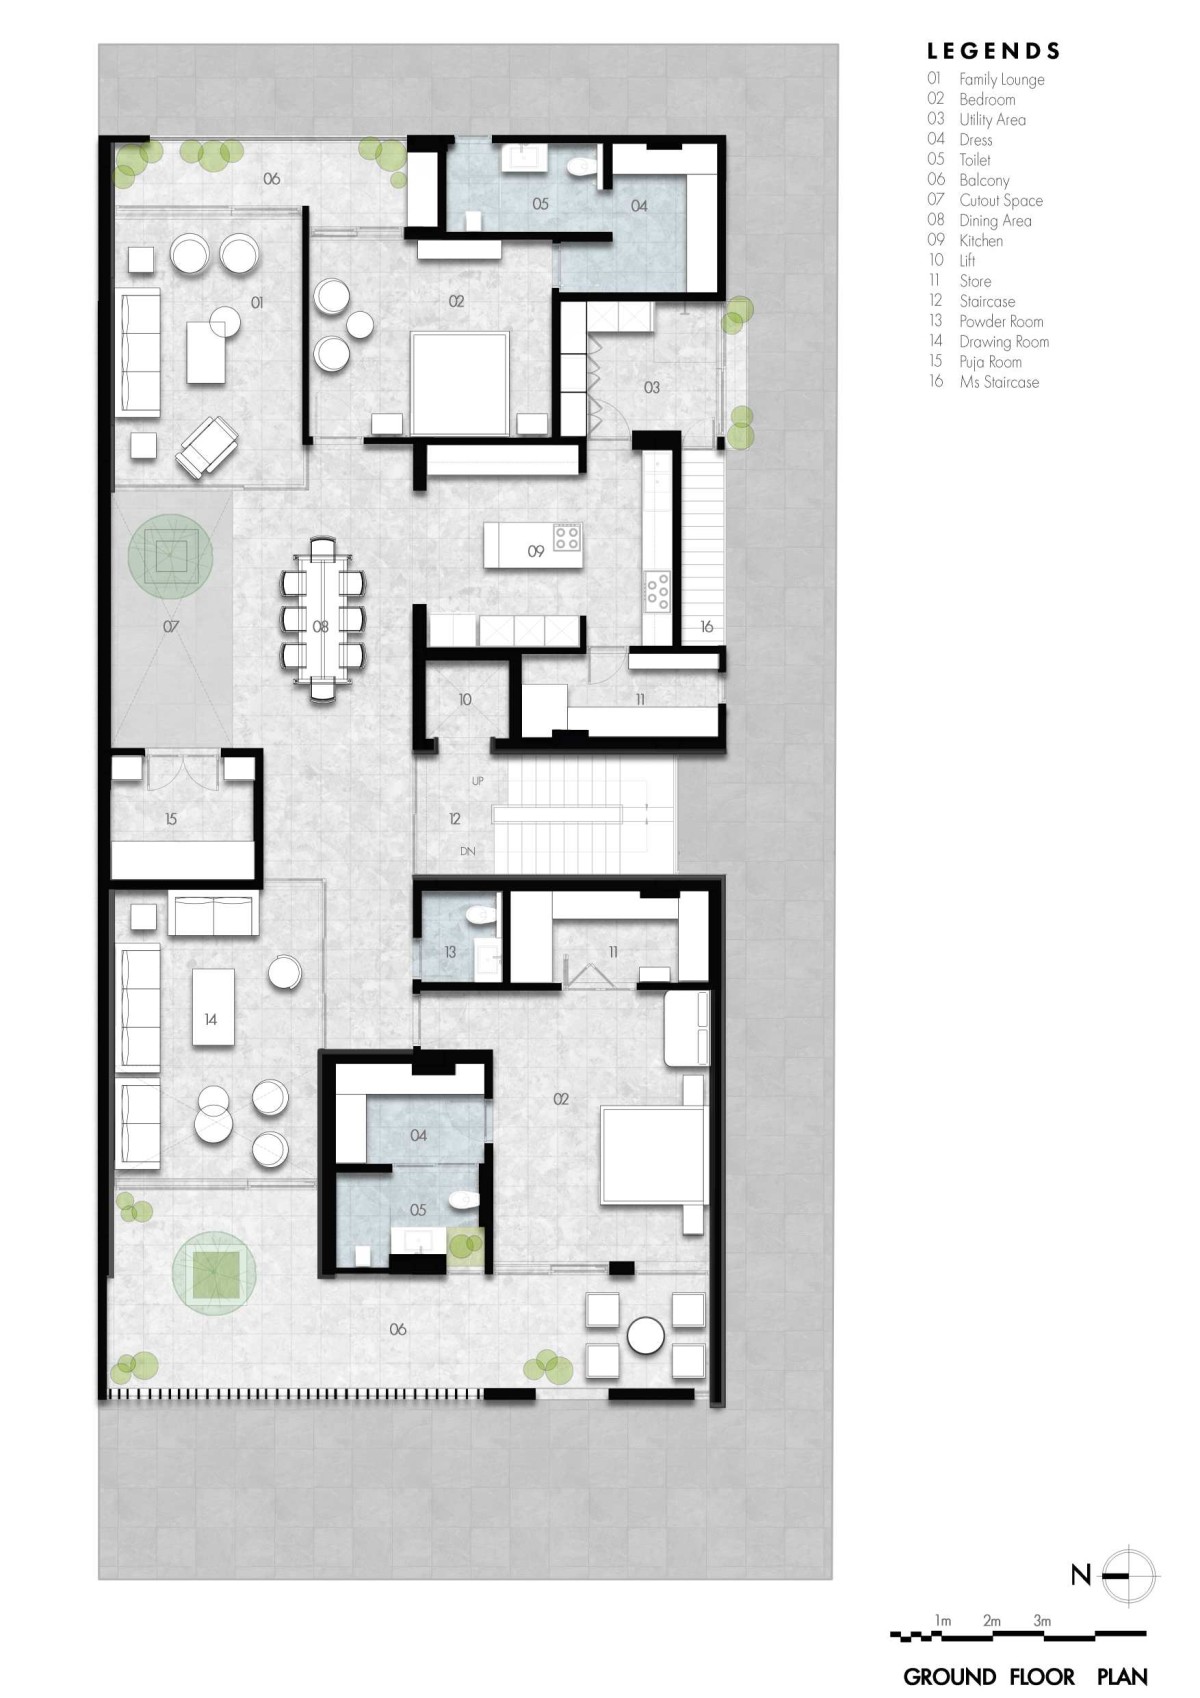 Ground floor plan of Swatantra Residence by Spaces Architects@ka